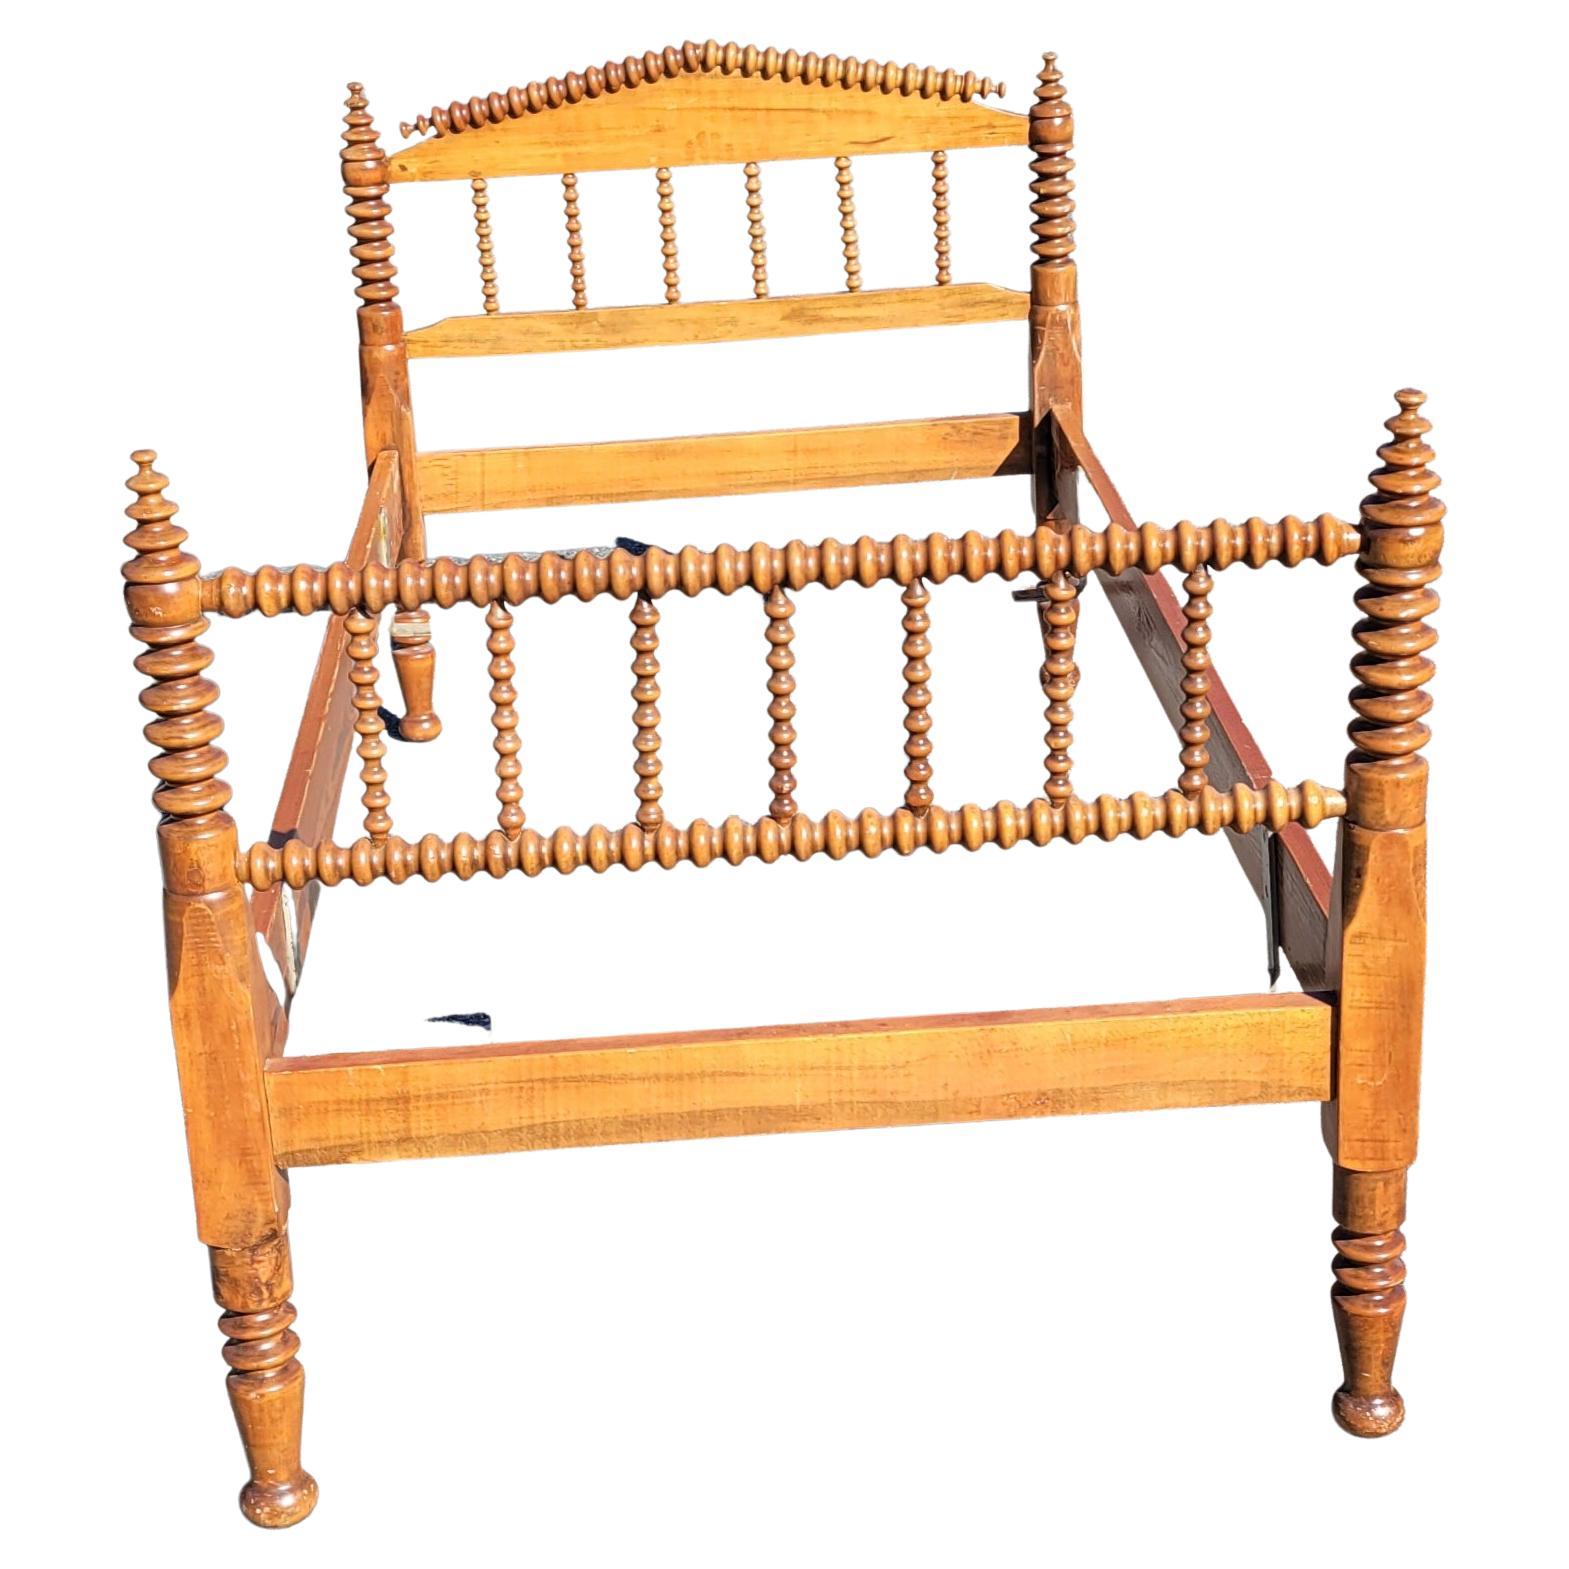 A charming 19th century Victorian Youth Spool Bed in good antique condition. 
Measures 79.75